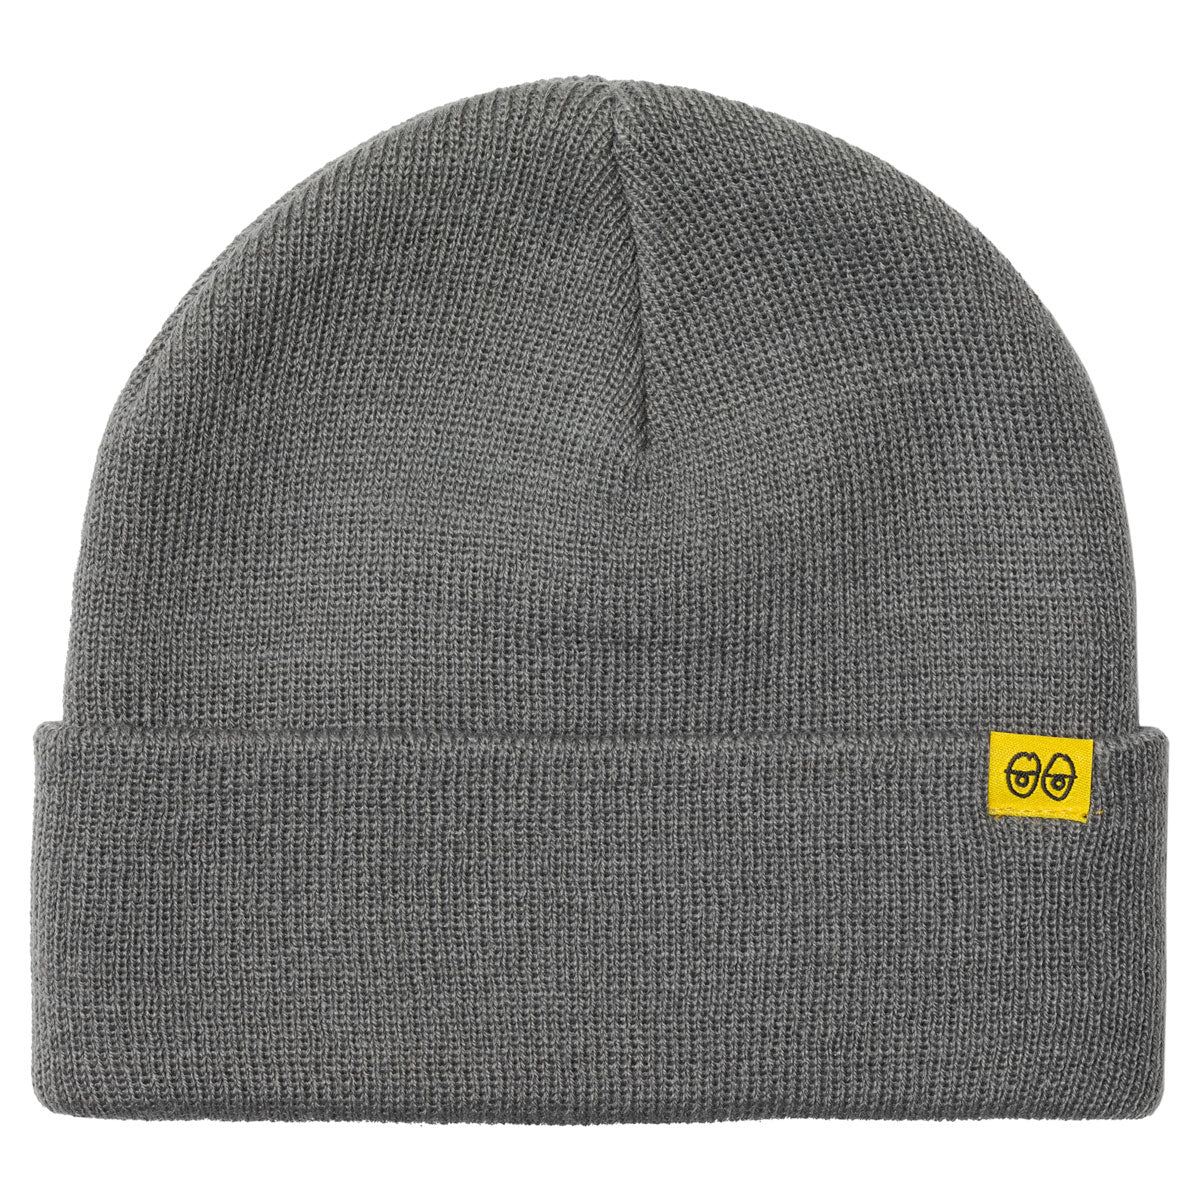 Krooked Eyes Clip Beanie - Grey/Yellow image 1